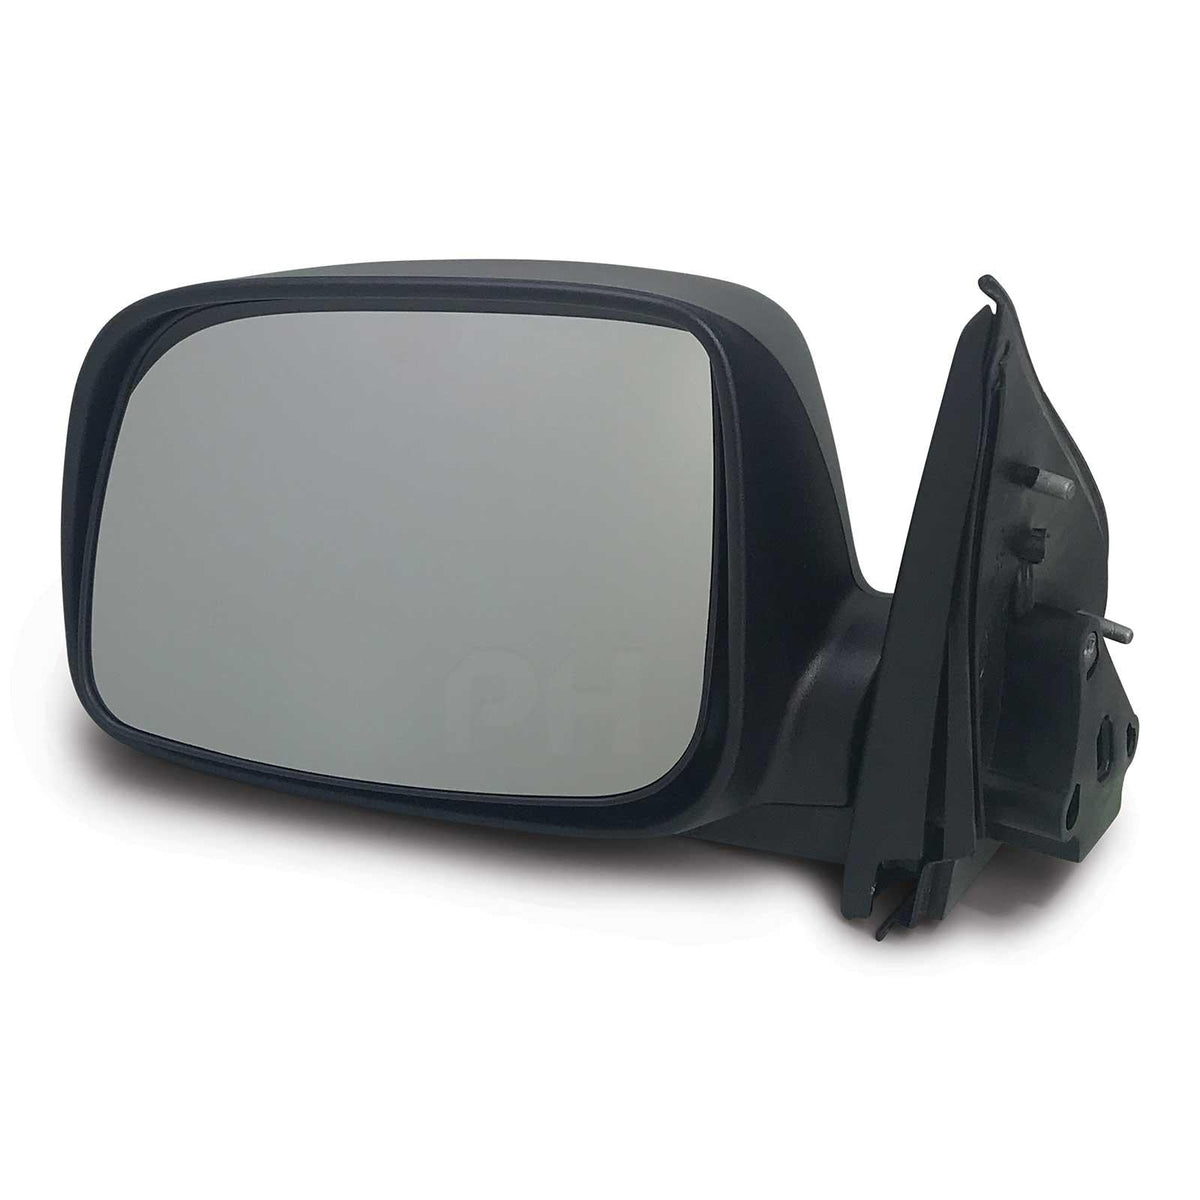 Panel House - Door Mirror Black Manual LEFT Hand Side for Ute Rodeo Colorado DMax LH - 4X4OC™ | 4x4 Offroad Centre